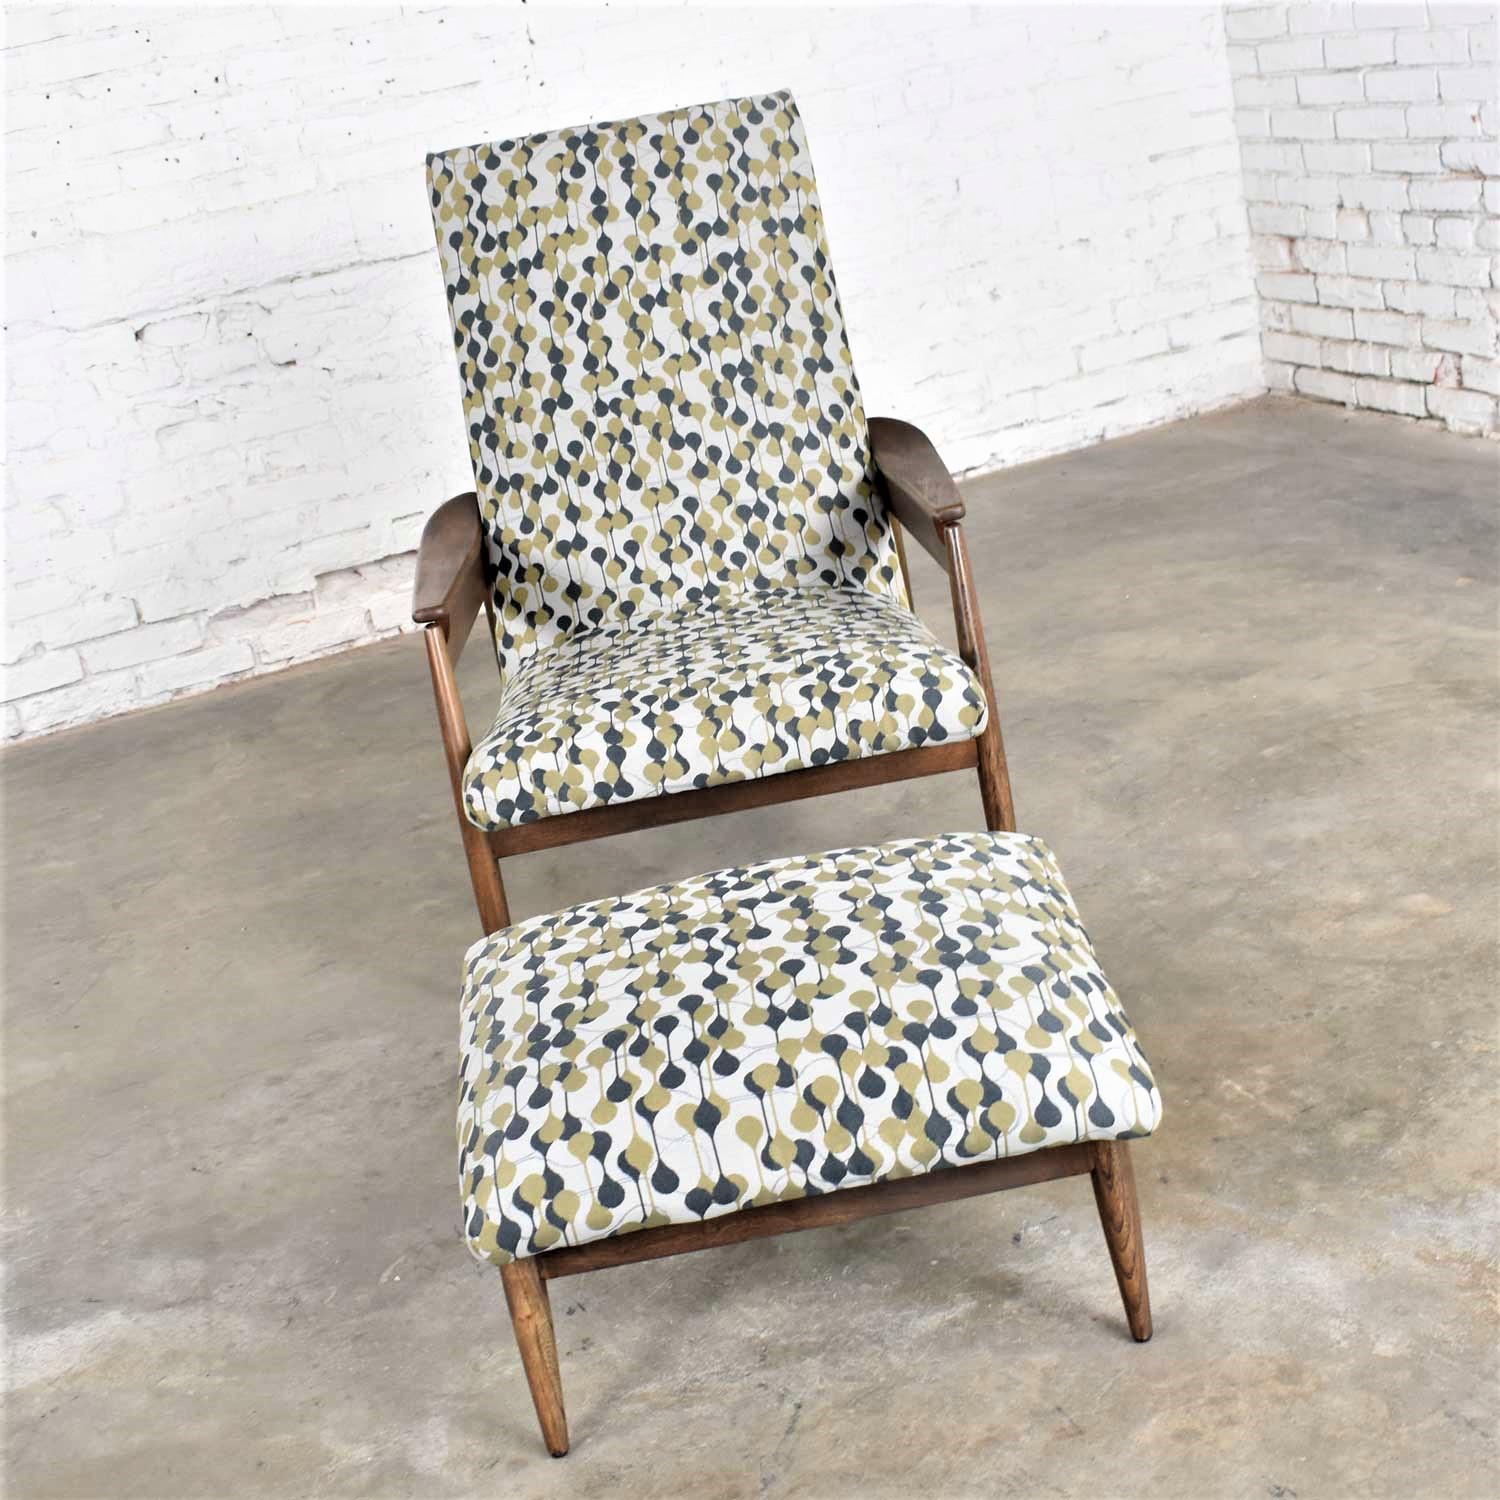 MCM Scandinavian Modern Style High Back Lounge Chair & Ottoman Attributed to Home Chair Company 1950-1960